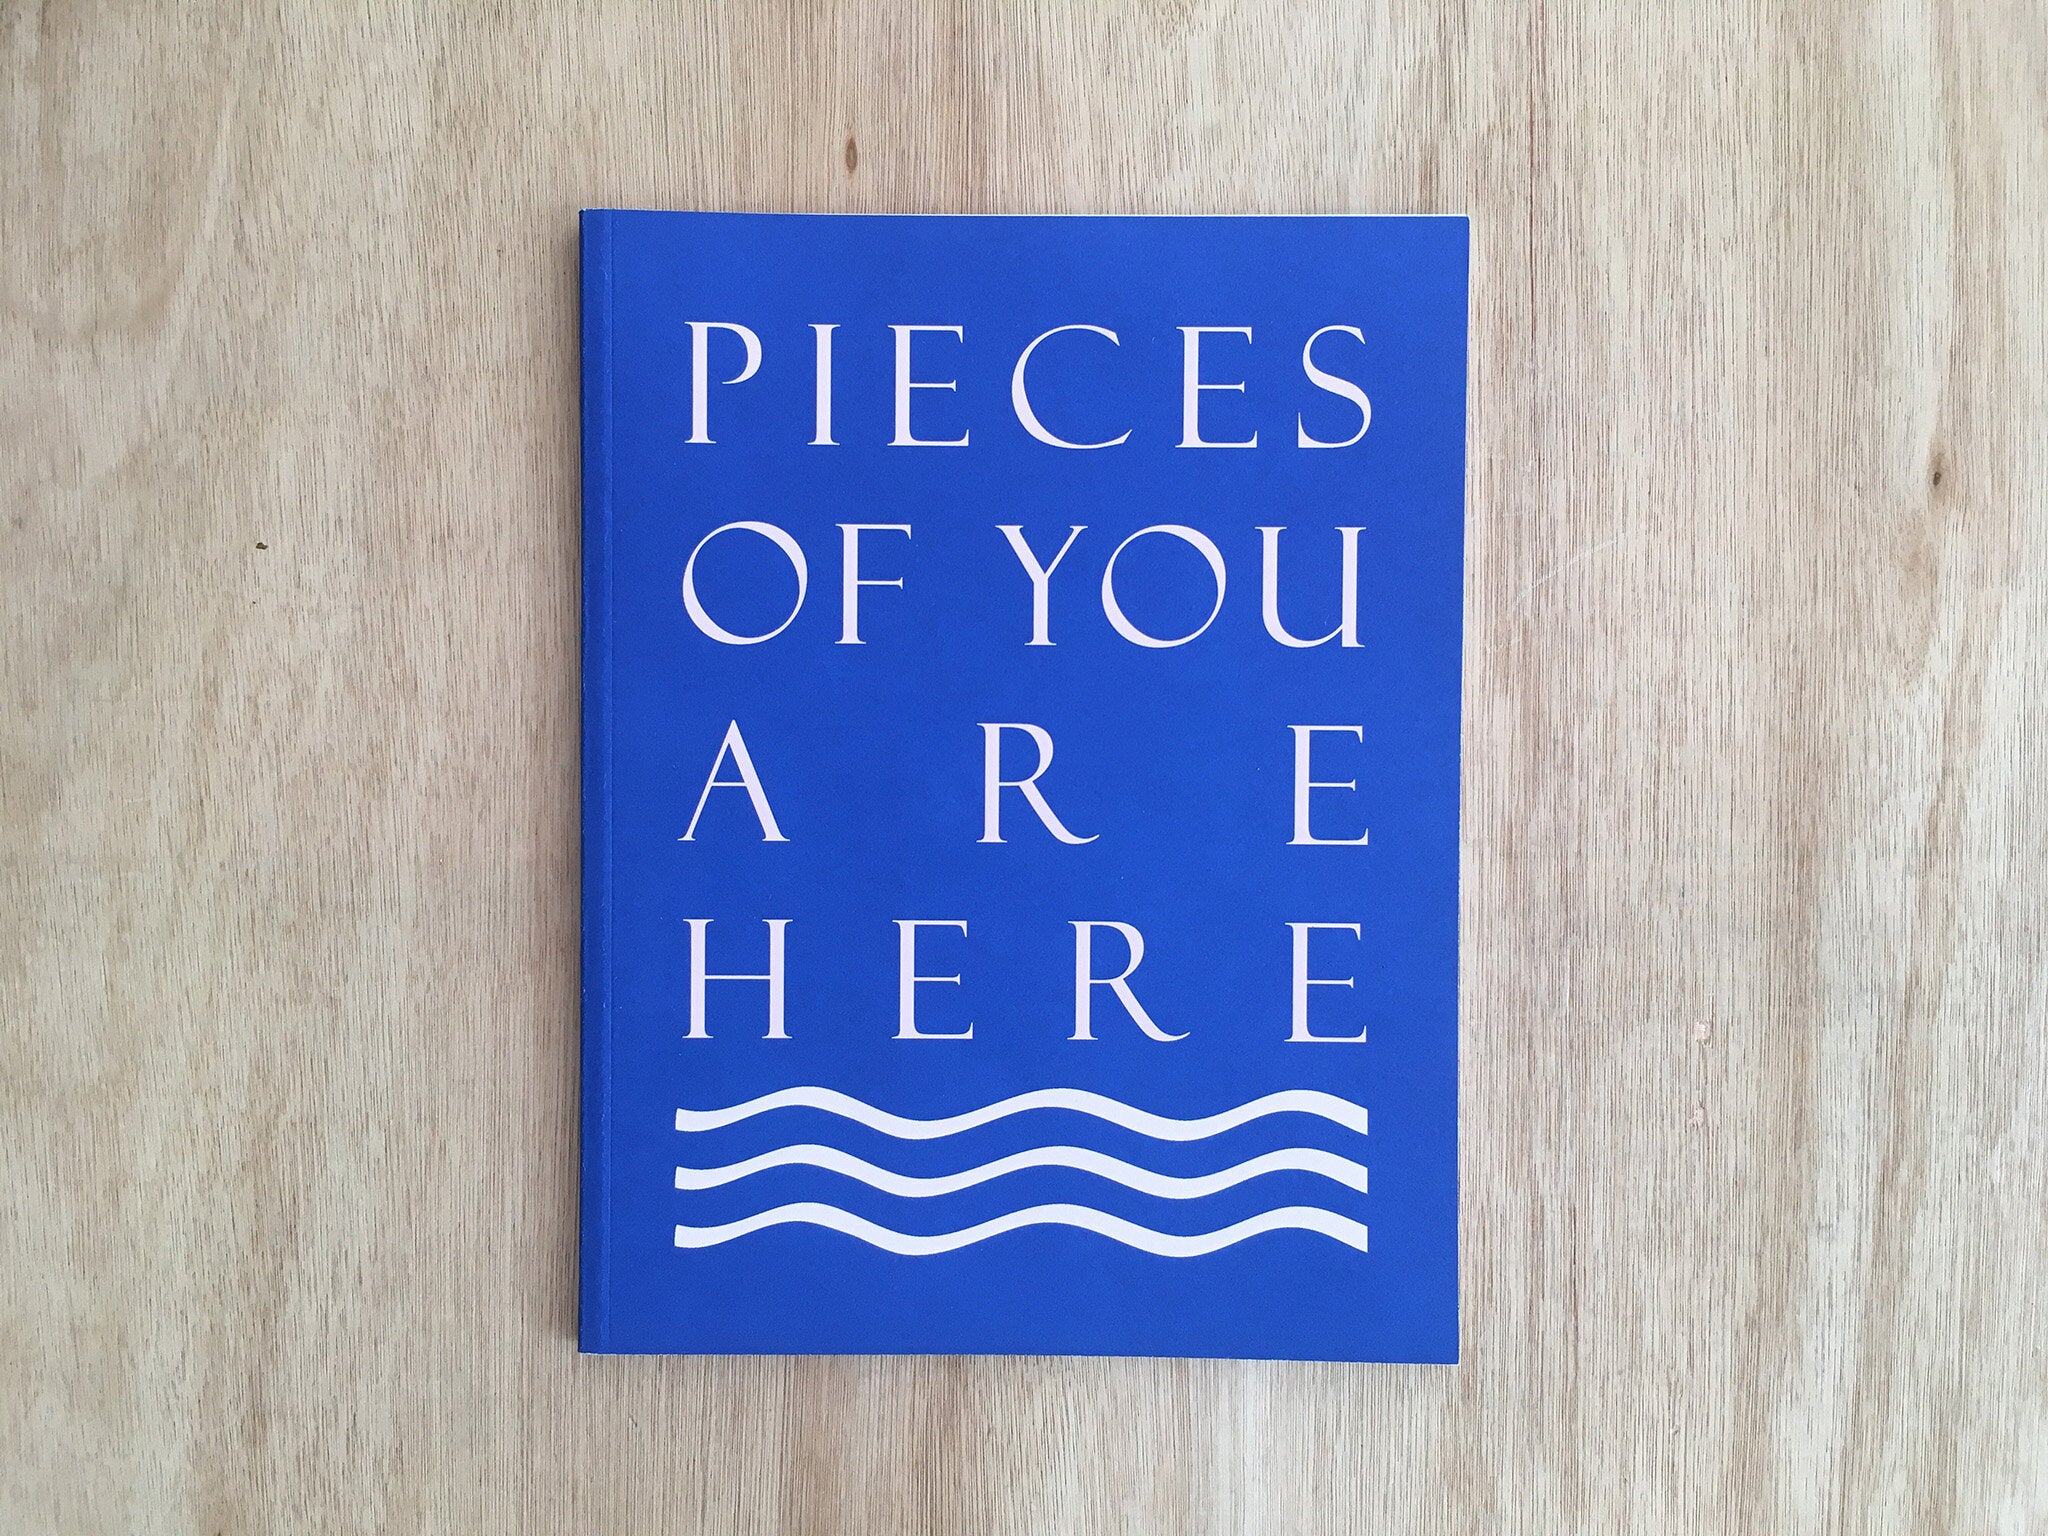 PIECES OF YOU ARE HERE by Lorna Macintyre